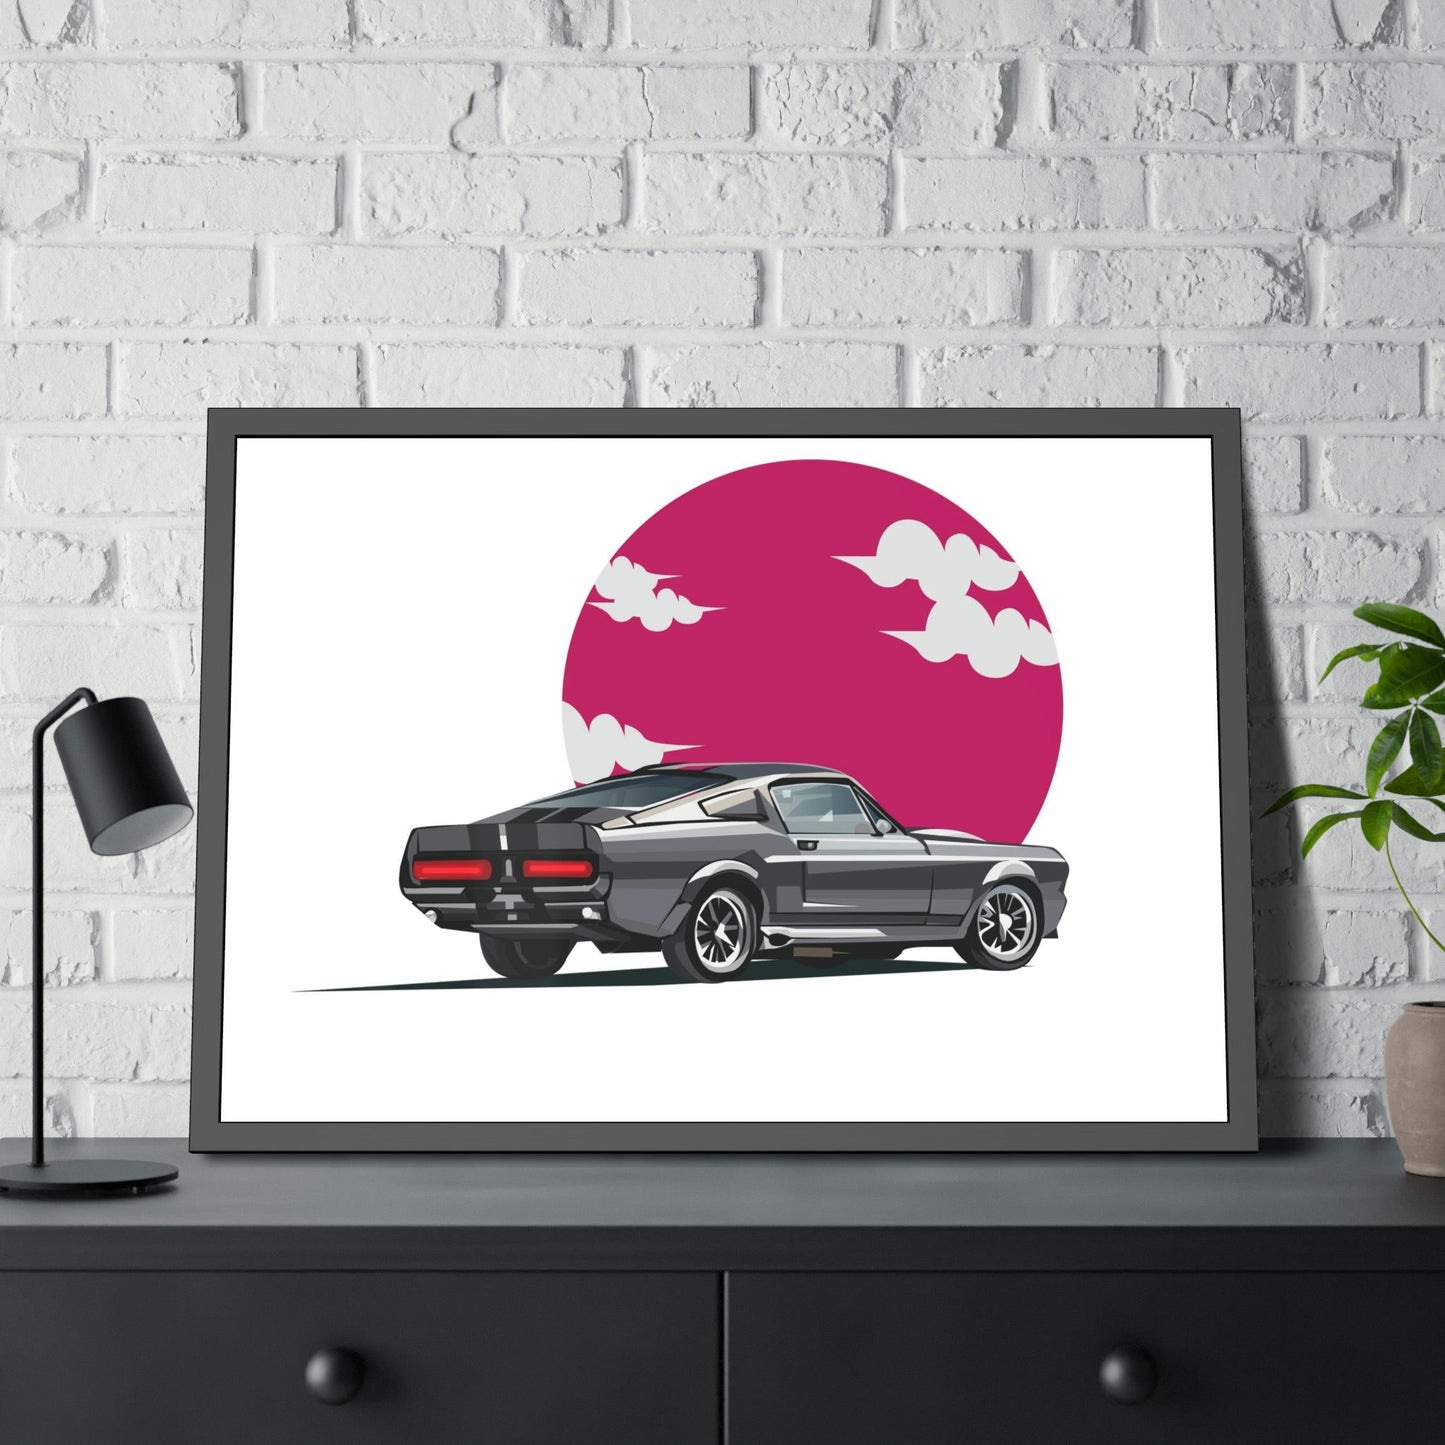 Iconic Mustang: Framed Poster and Art Print on Canvas